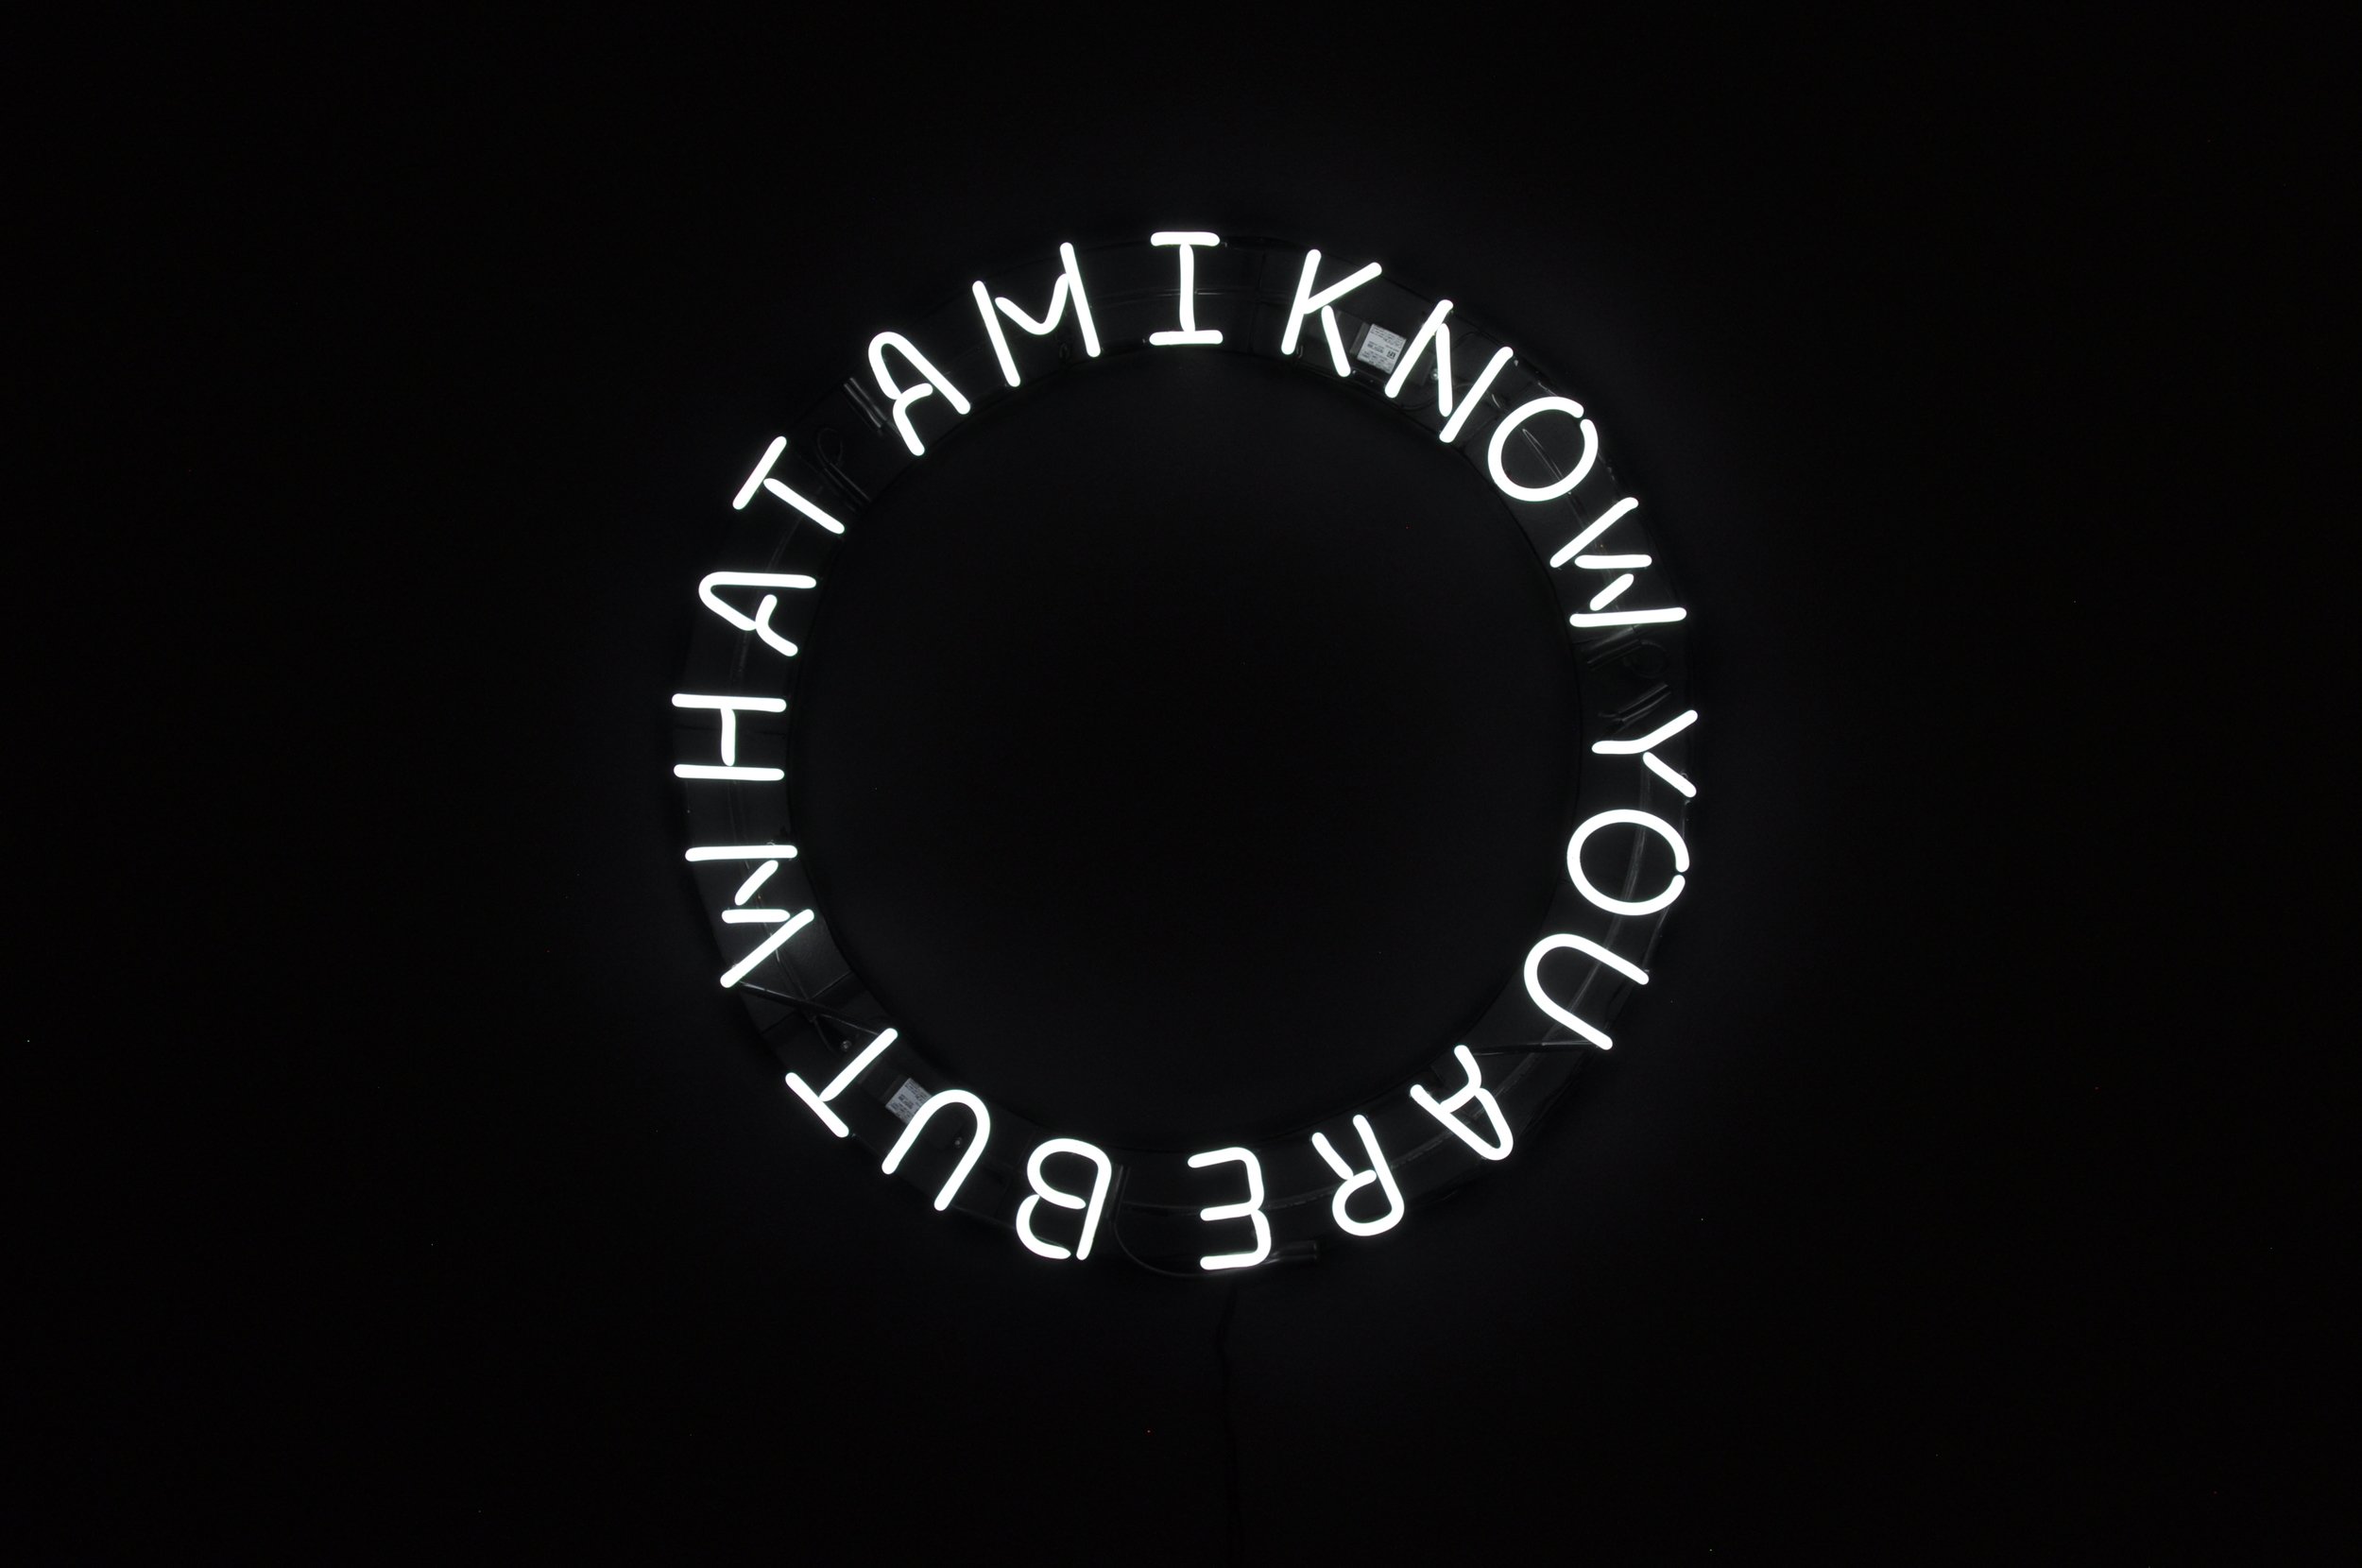 I KNOW YOU ARE BUT WHAT AM I?, 2015